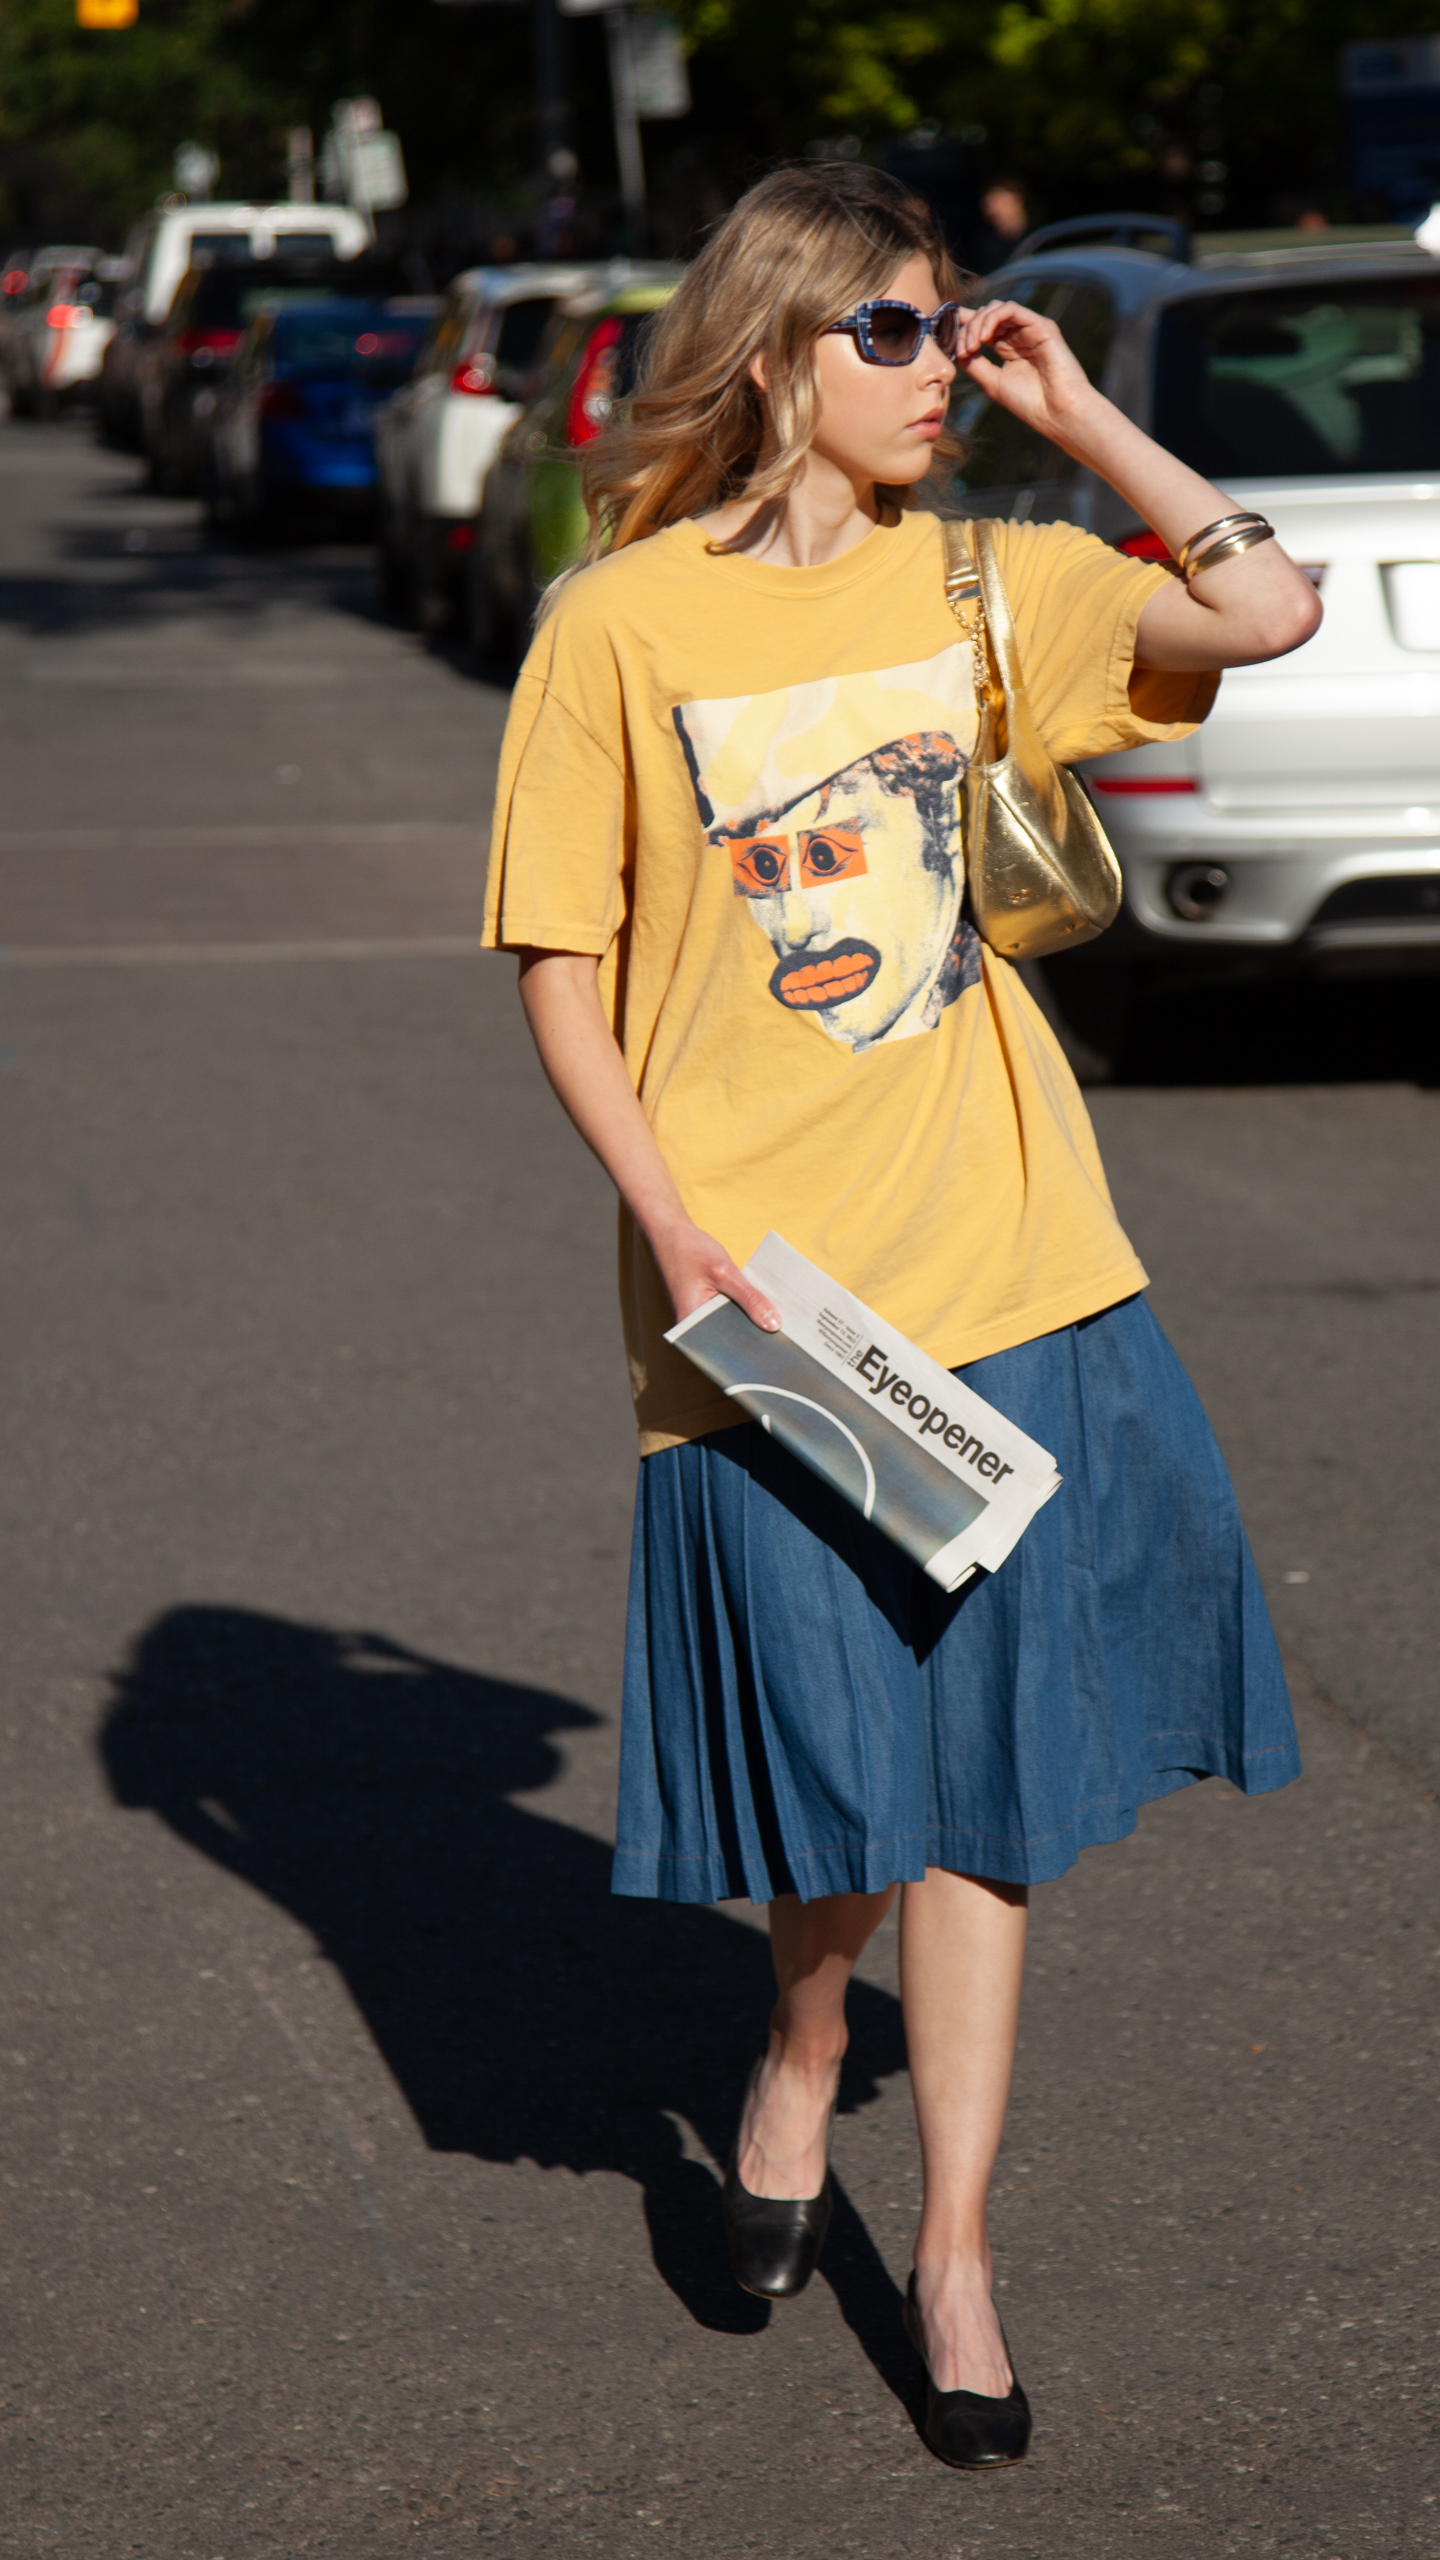 Model walking through campus wears yellow band tee and a denim circle skirt with a gold coloured handbag